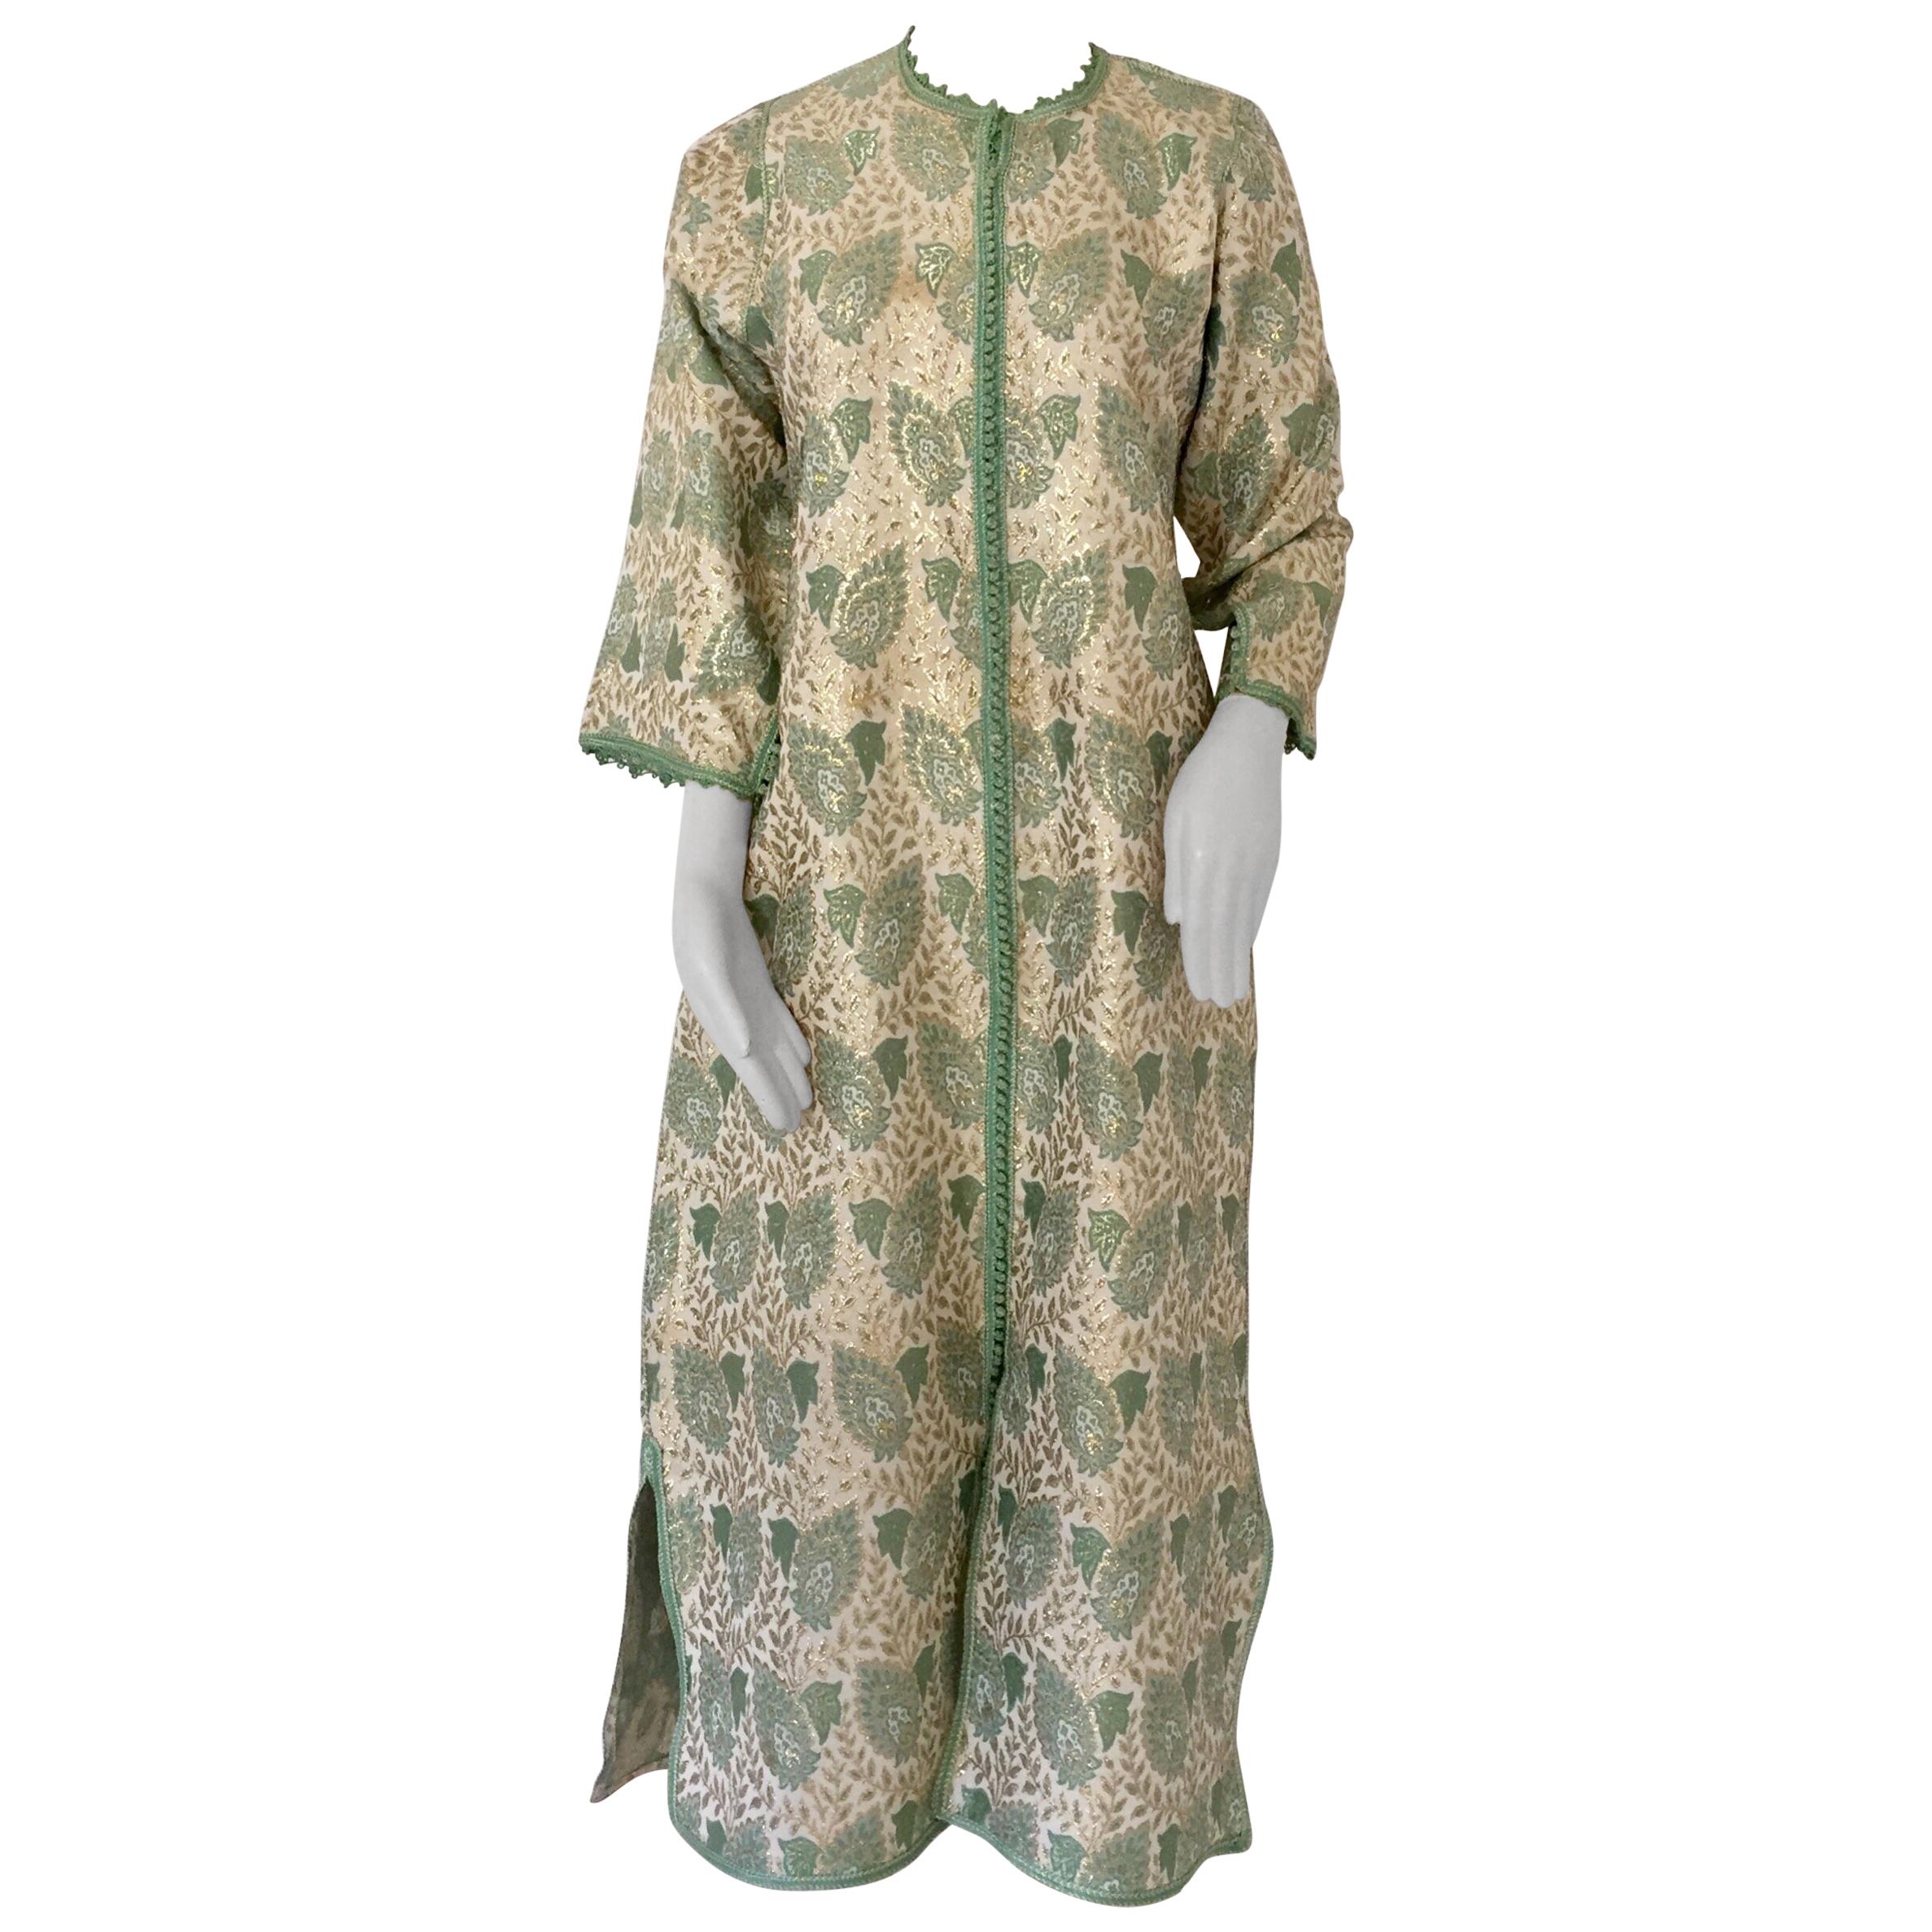 Elegant Moroccan Caftan Green and Silver and Gold Metallic Floral Brocade